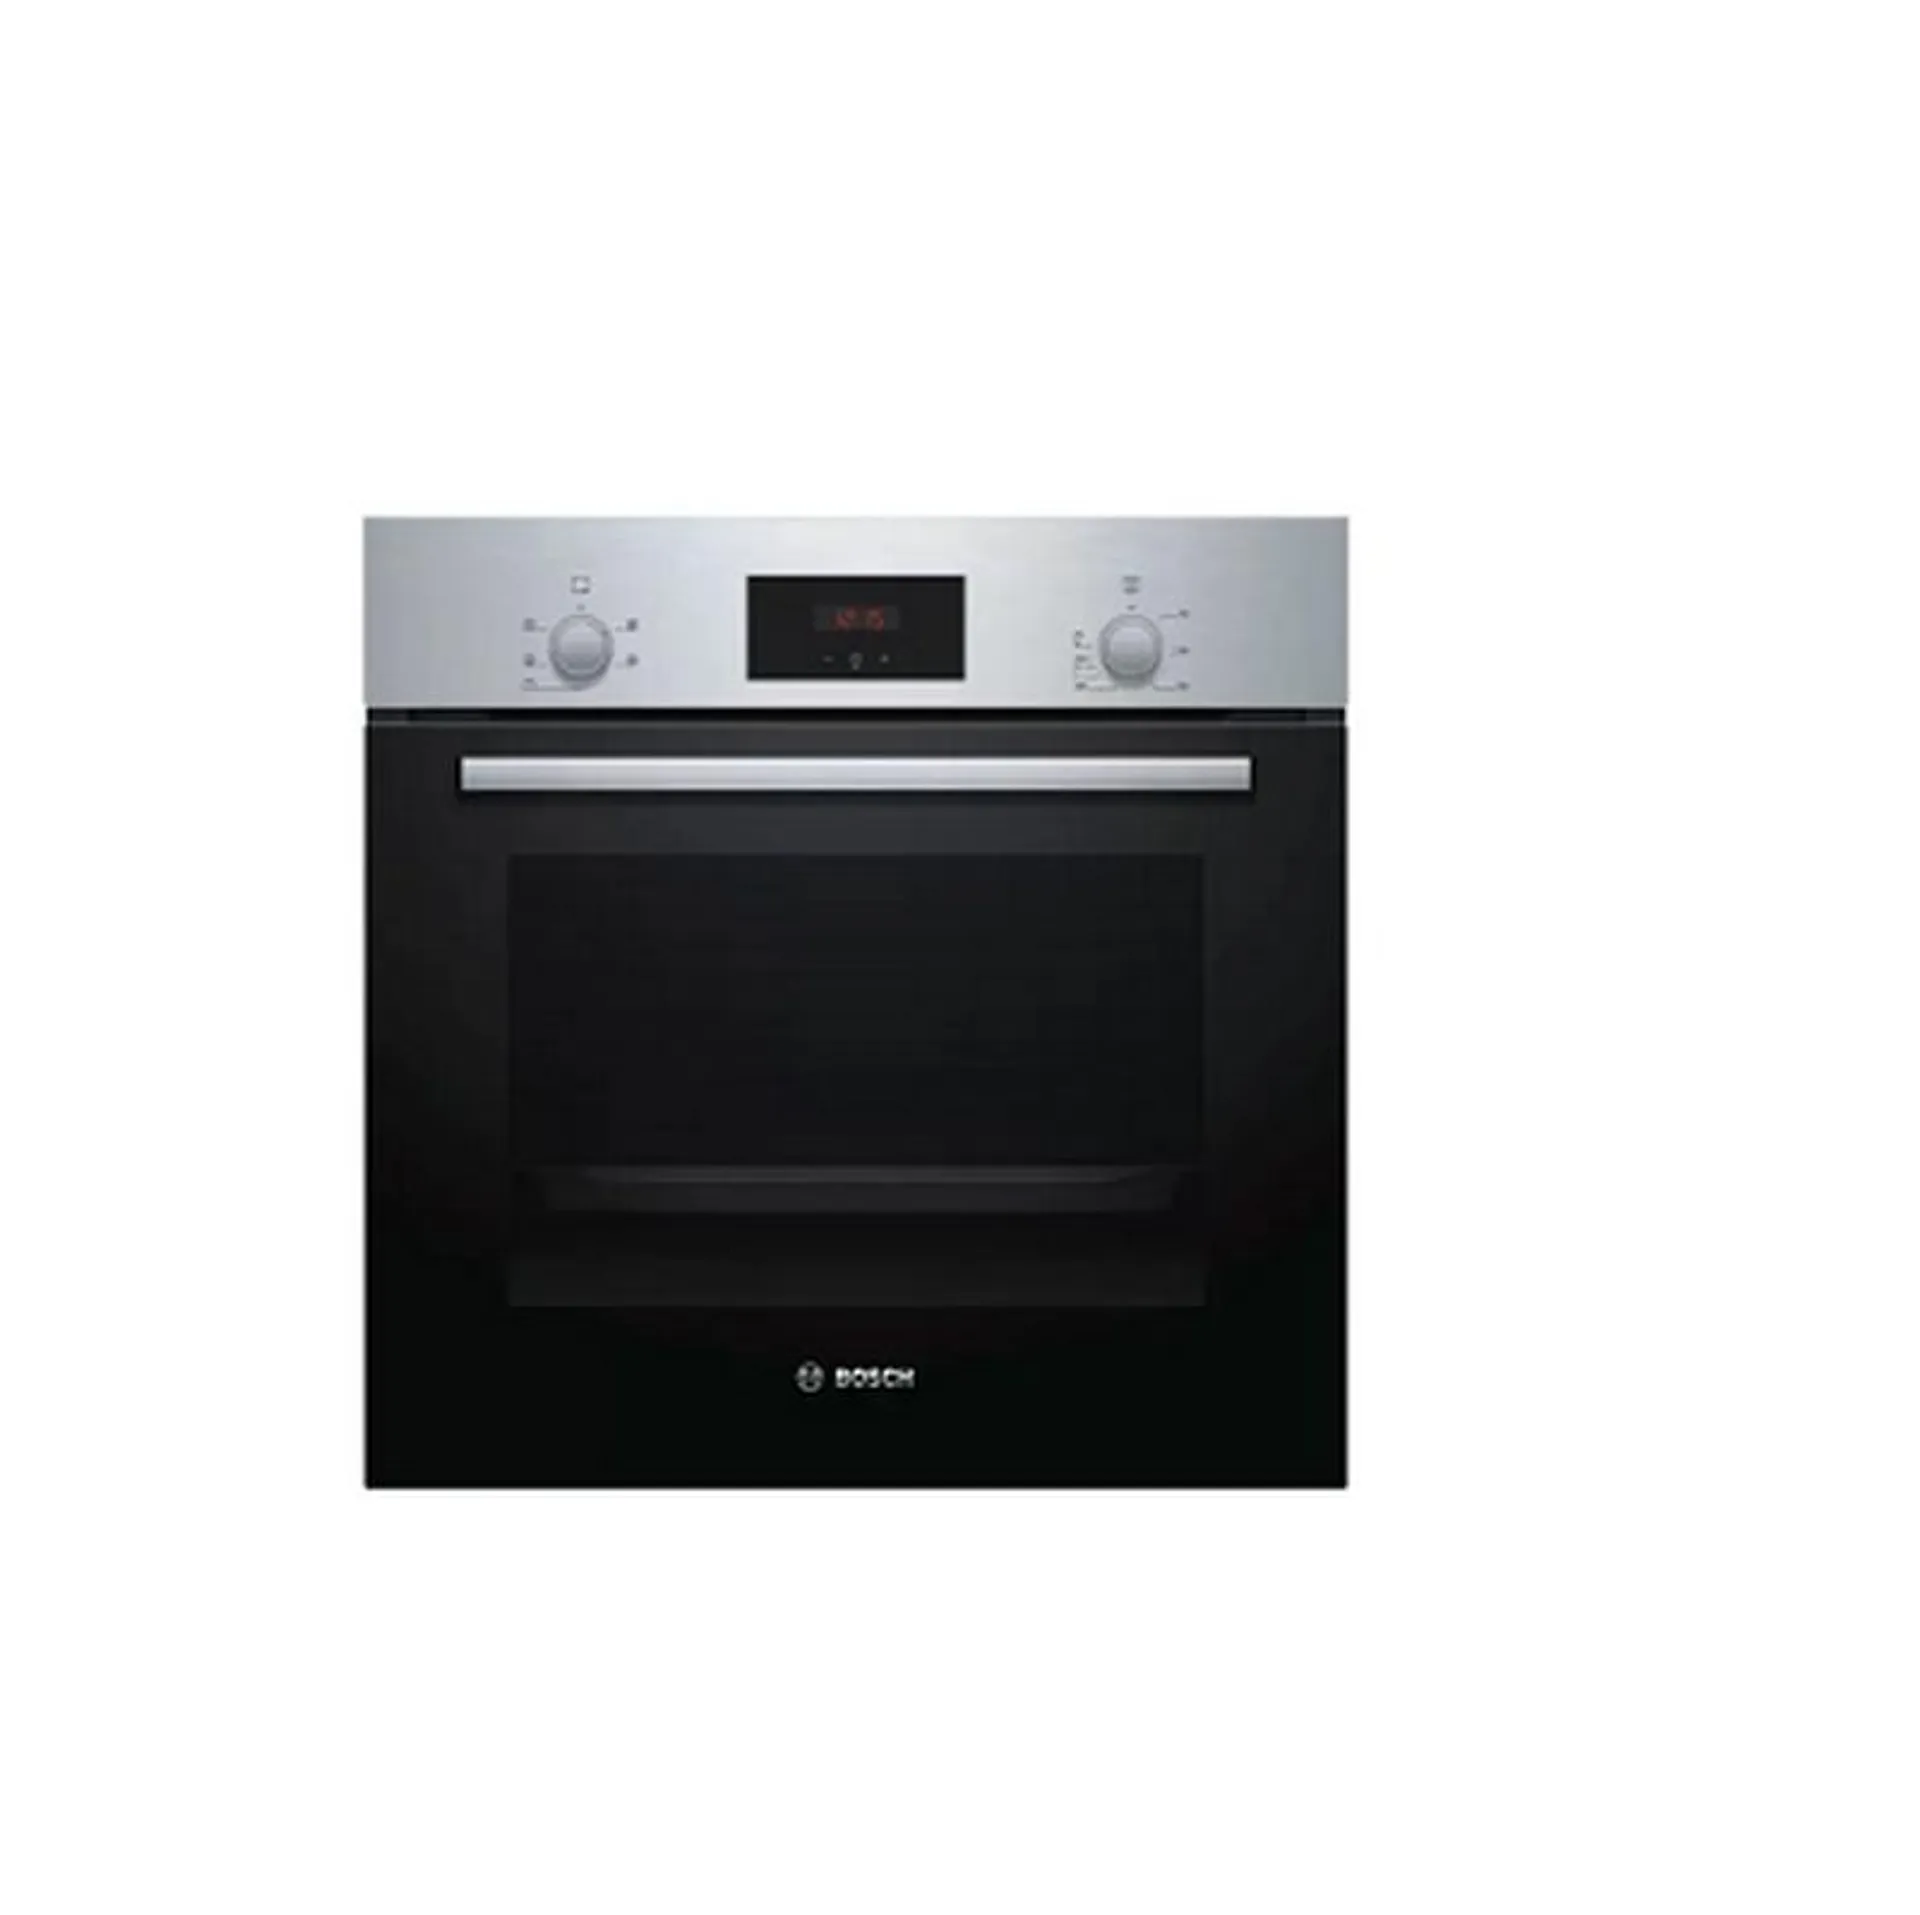 BOSCH Series 2 Single Electric Oven – Stainless Steel